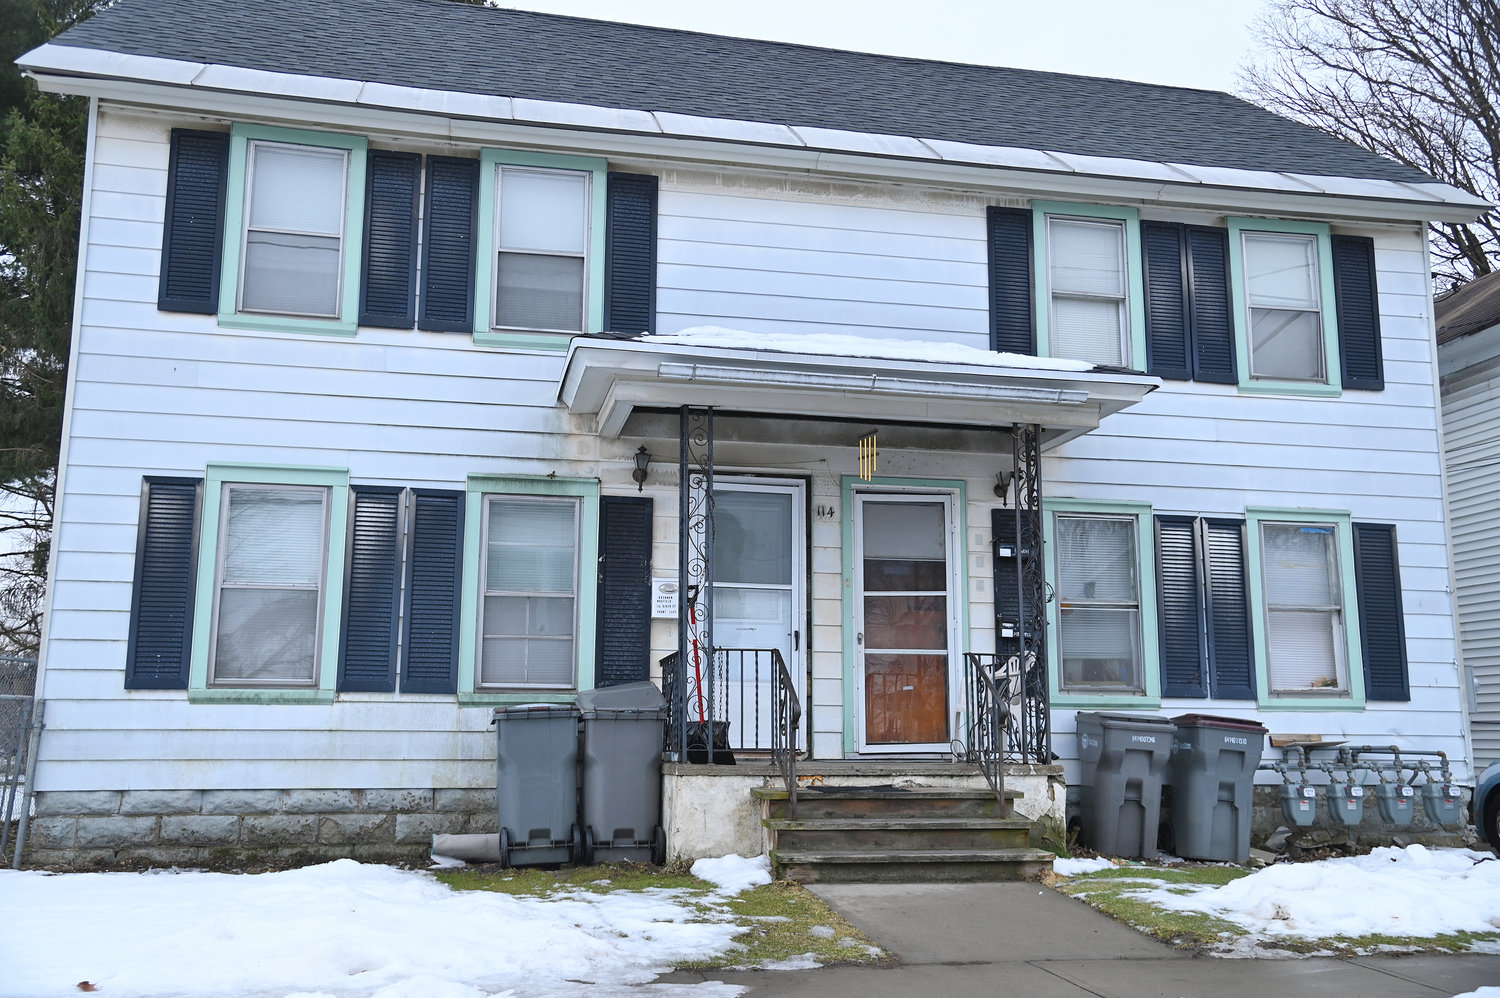 The parcel at 114 1/2 River St. in Rome is shown on Monday, Feb. 6.  Last week, the city’s Zoning Board of Appeals rejected a request for a pair of variances to convert the structure from a two-unit dwelling to a three-unit dwelling.